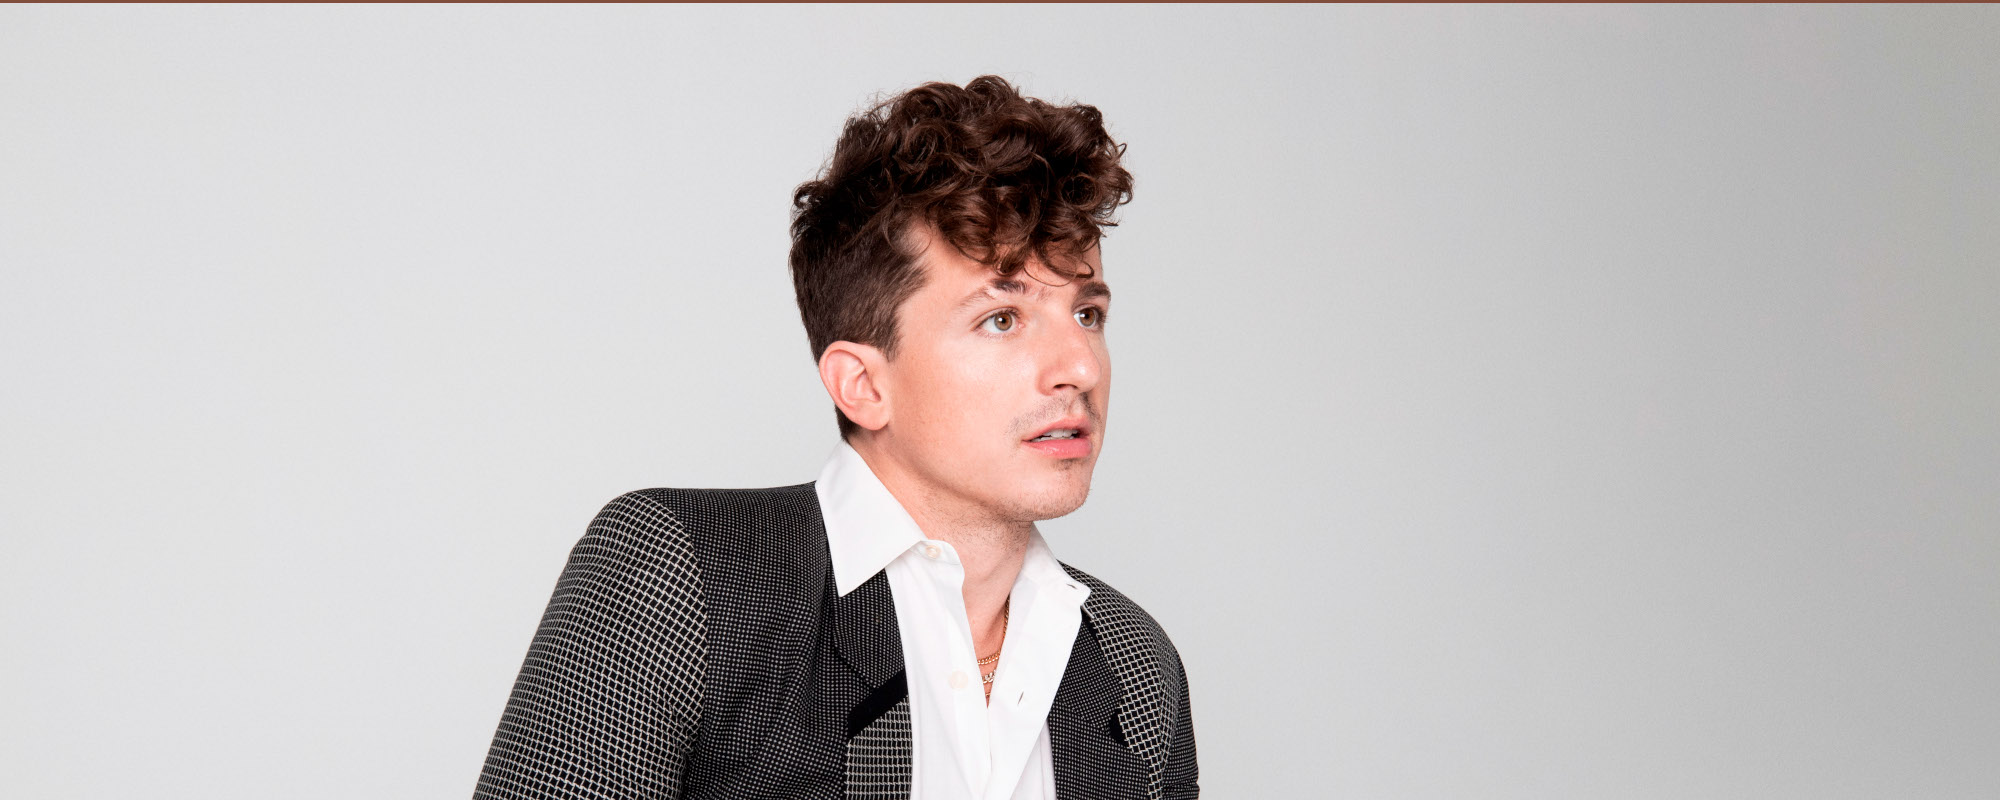 Top 10 Charlie Puth Songs